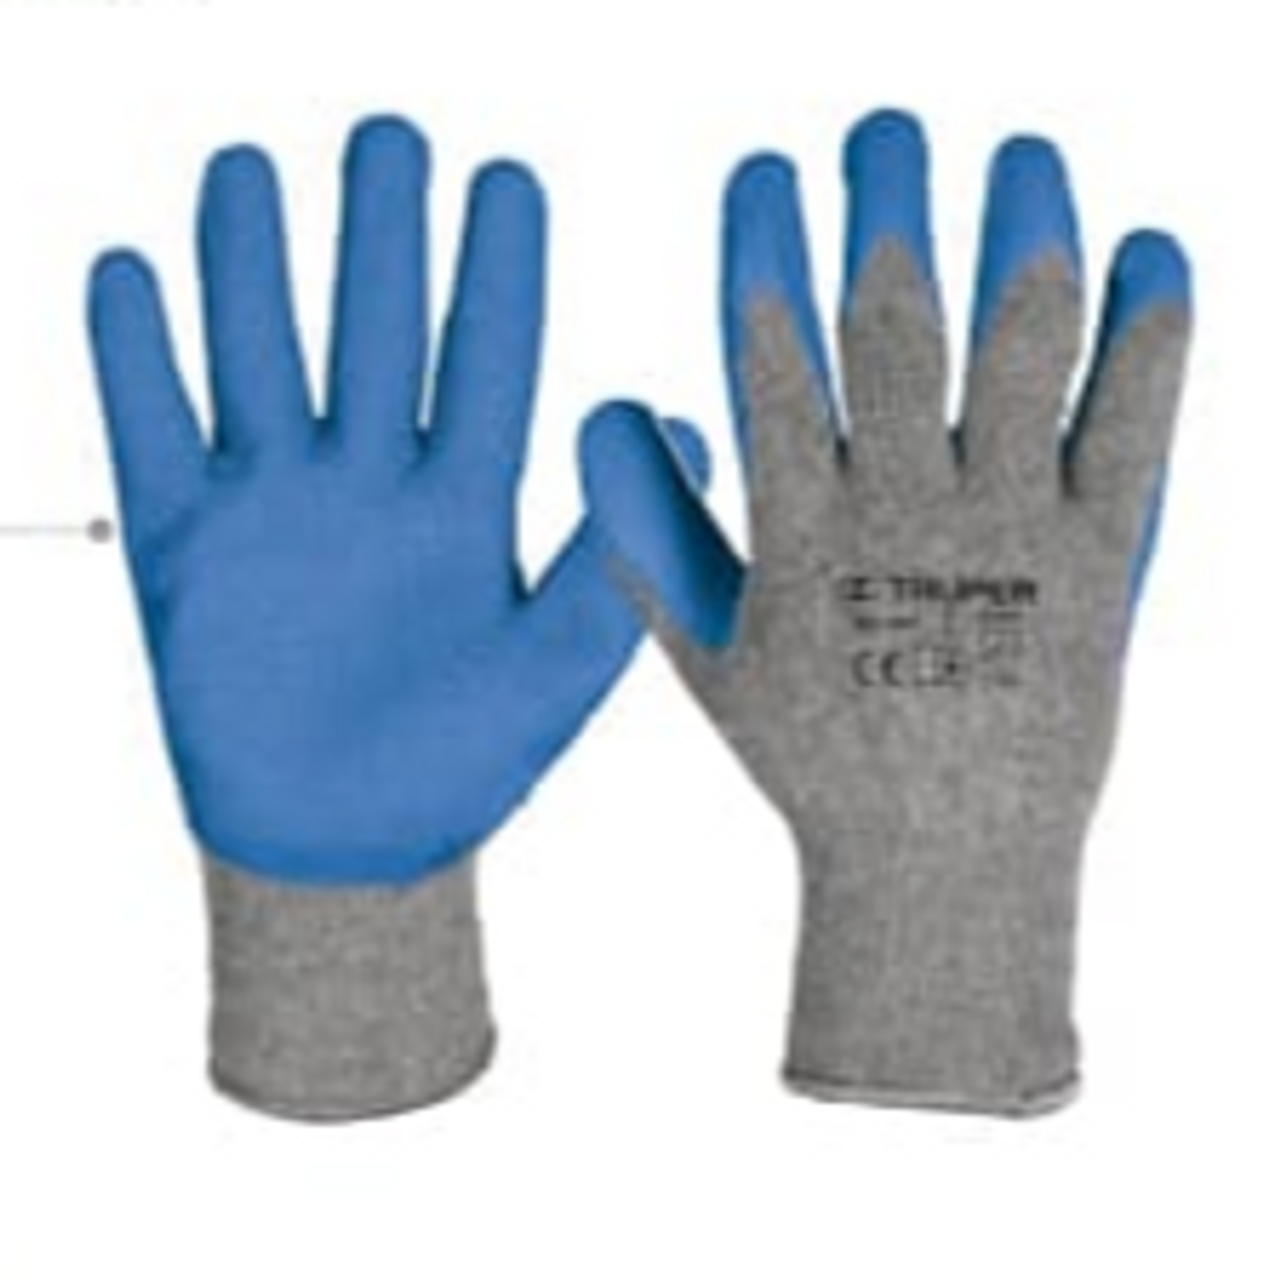 Truper Textured Latex Coated Textile Gloves, Gardening Gloves Small 2 Pack #15265